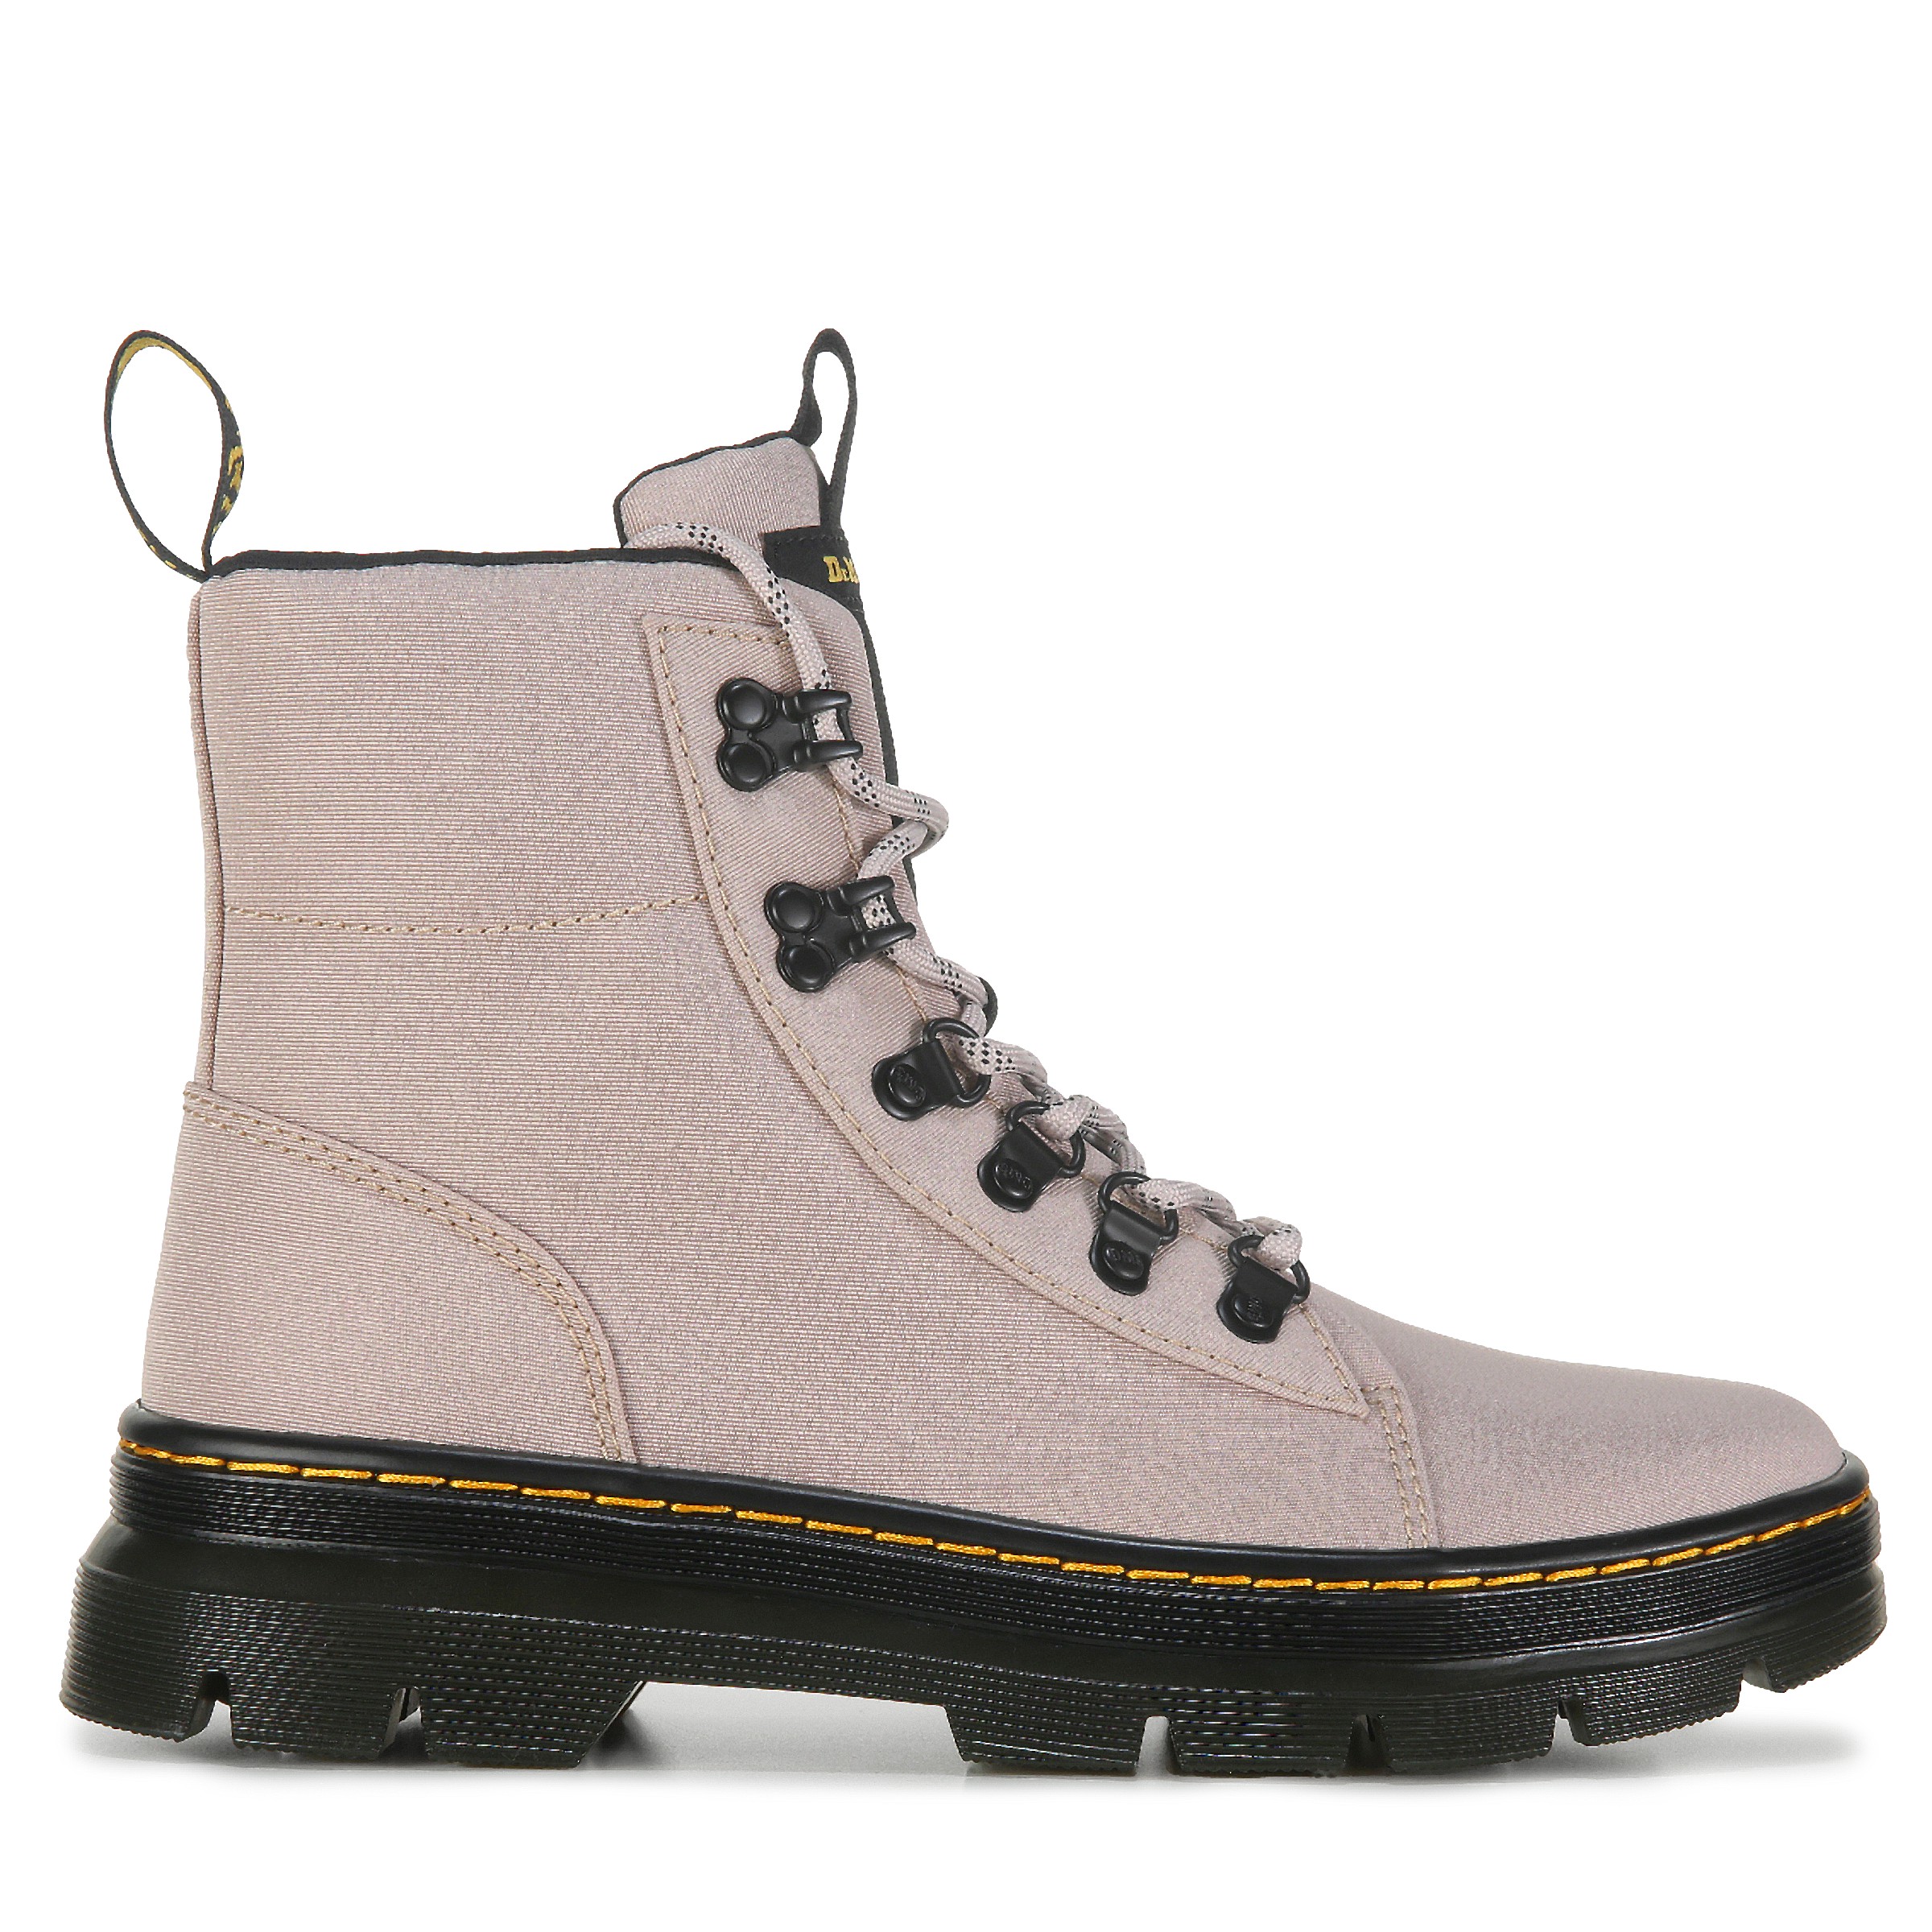 Dr. Martens Women's Combs Fur Lined Lace Up Boot